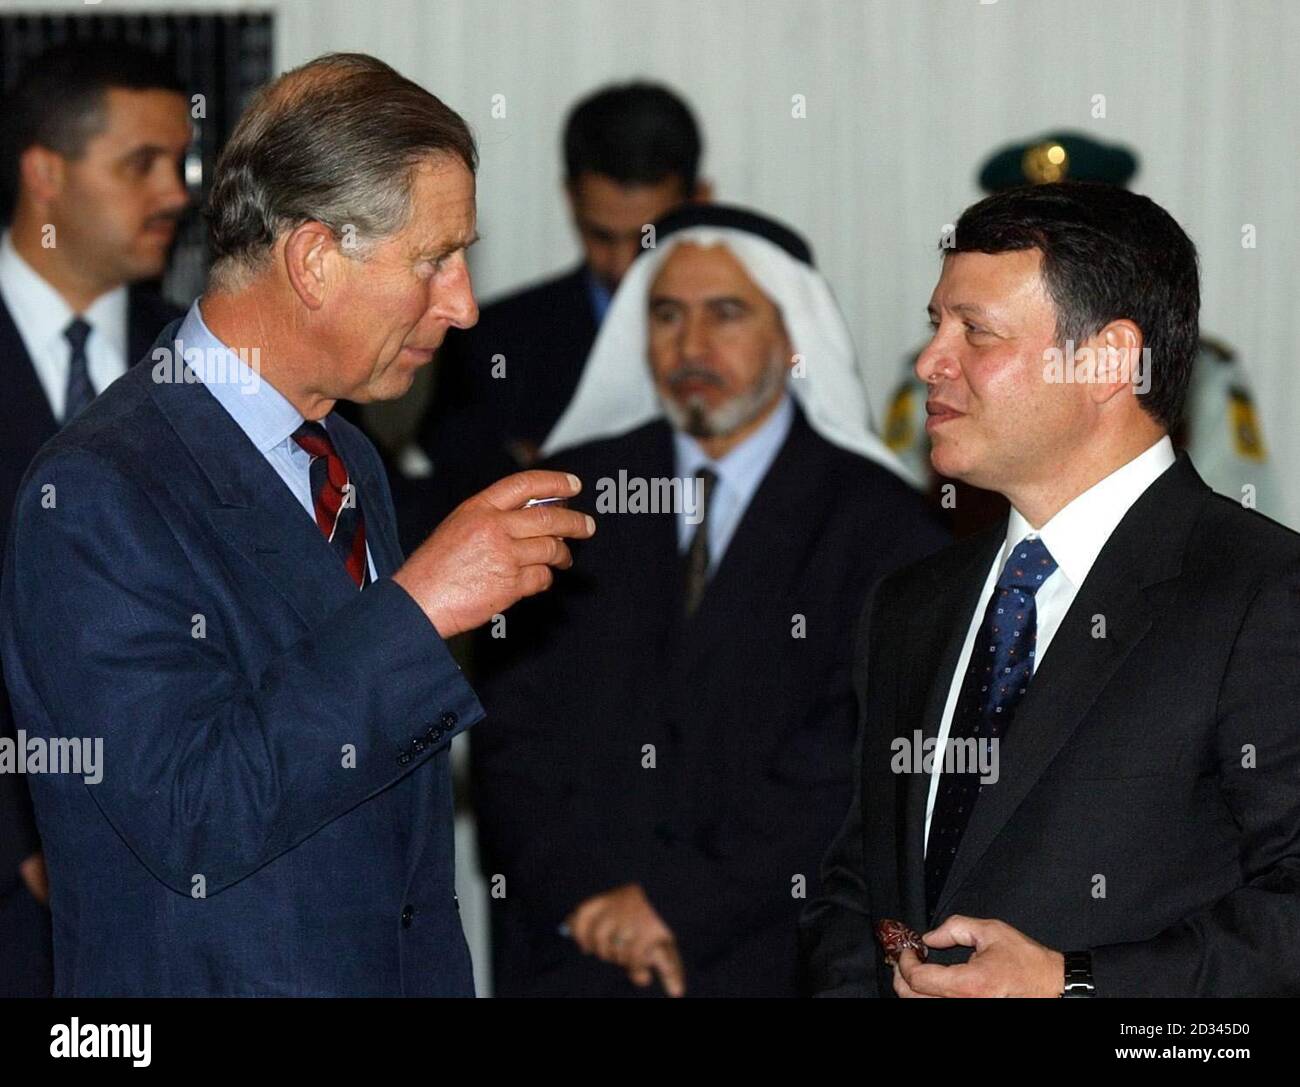 The Prince of Wales (left) and Jordan's King Abdullah speak to each other prior to iftar - the breaking of the fast at the end of the day in the Muslim holy month of Ramadan at the Royal Court in Amman, Jordan. Stock Photo